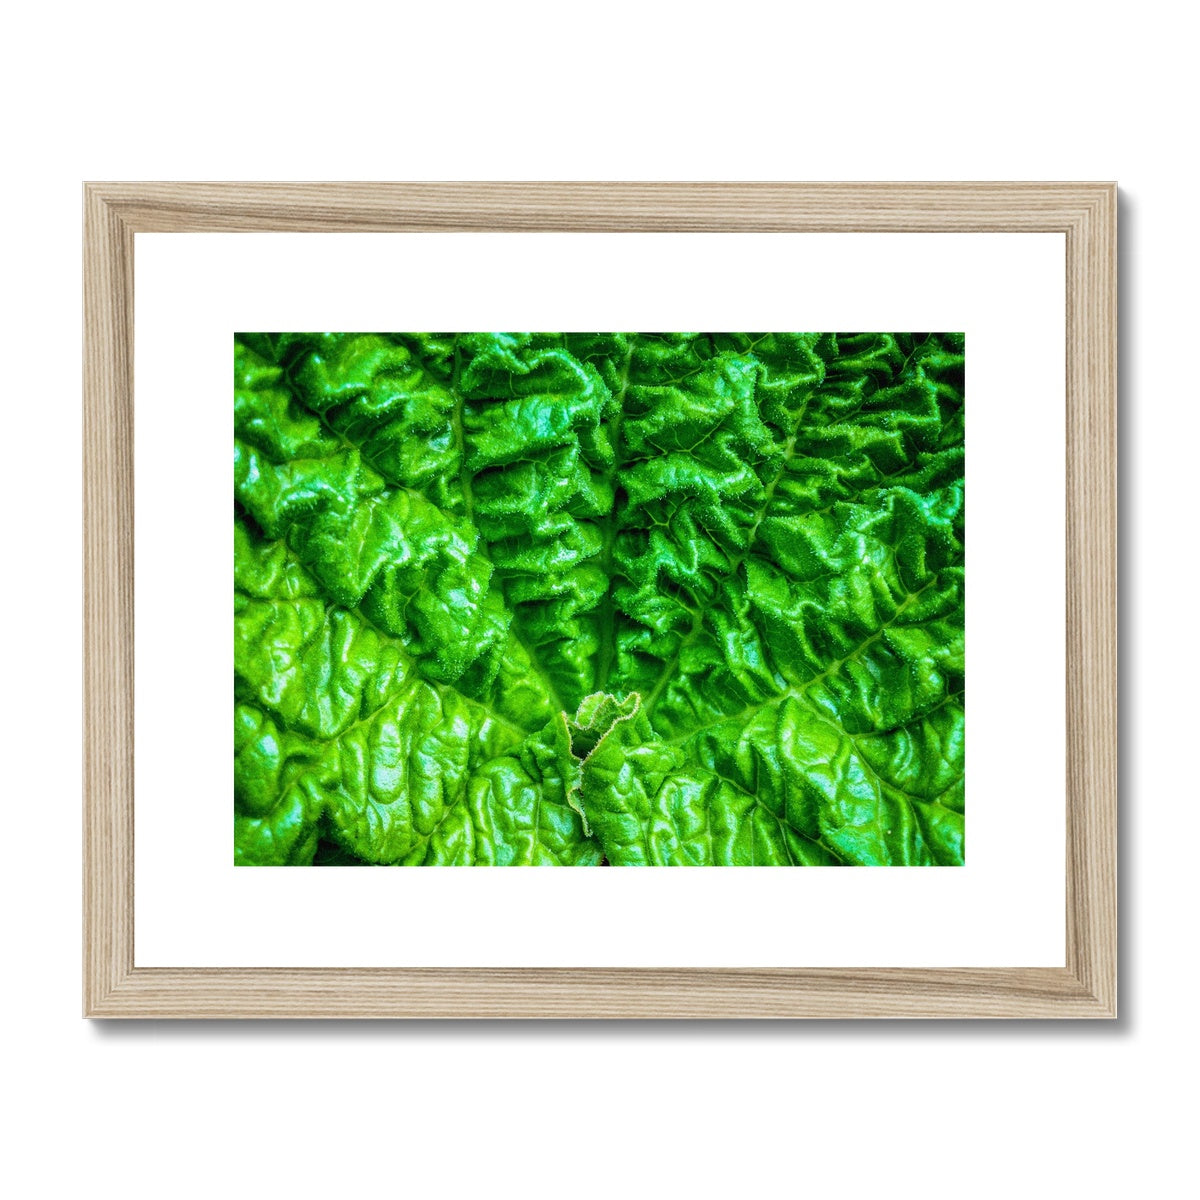 Close-up of the textured surface of a vivid green young rhubarb leaf Framed & Mounted Print